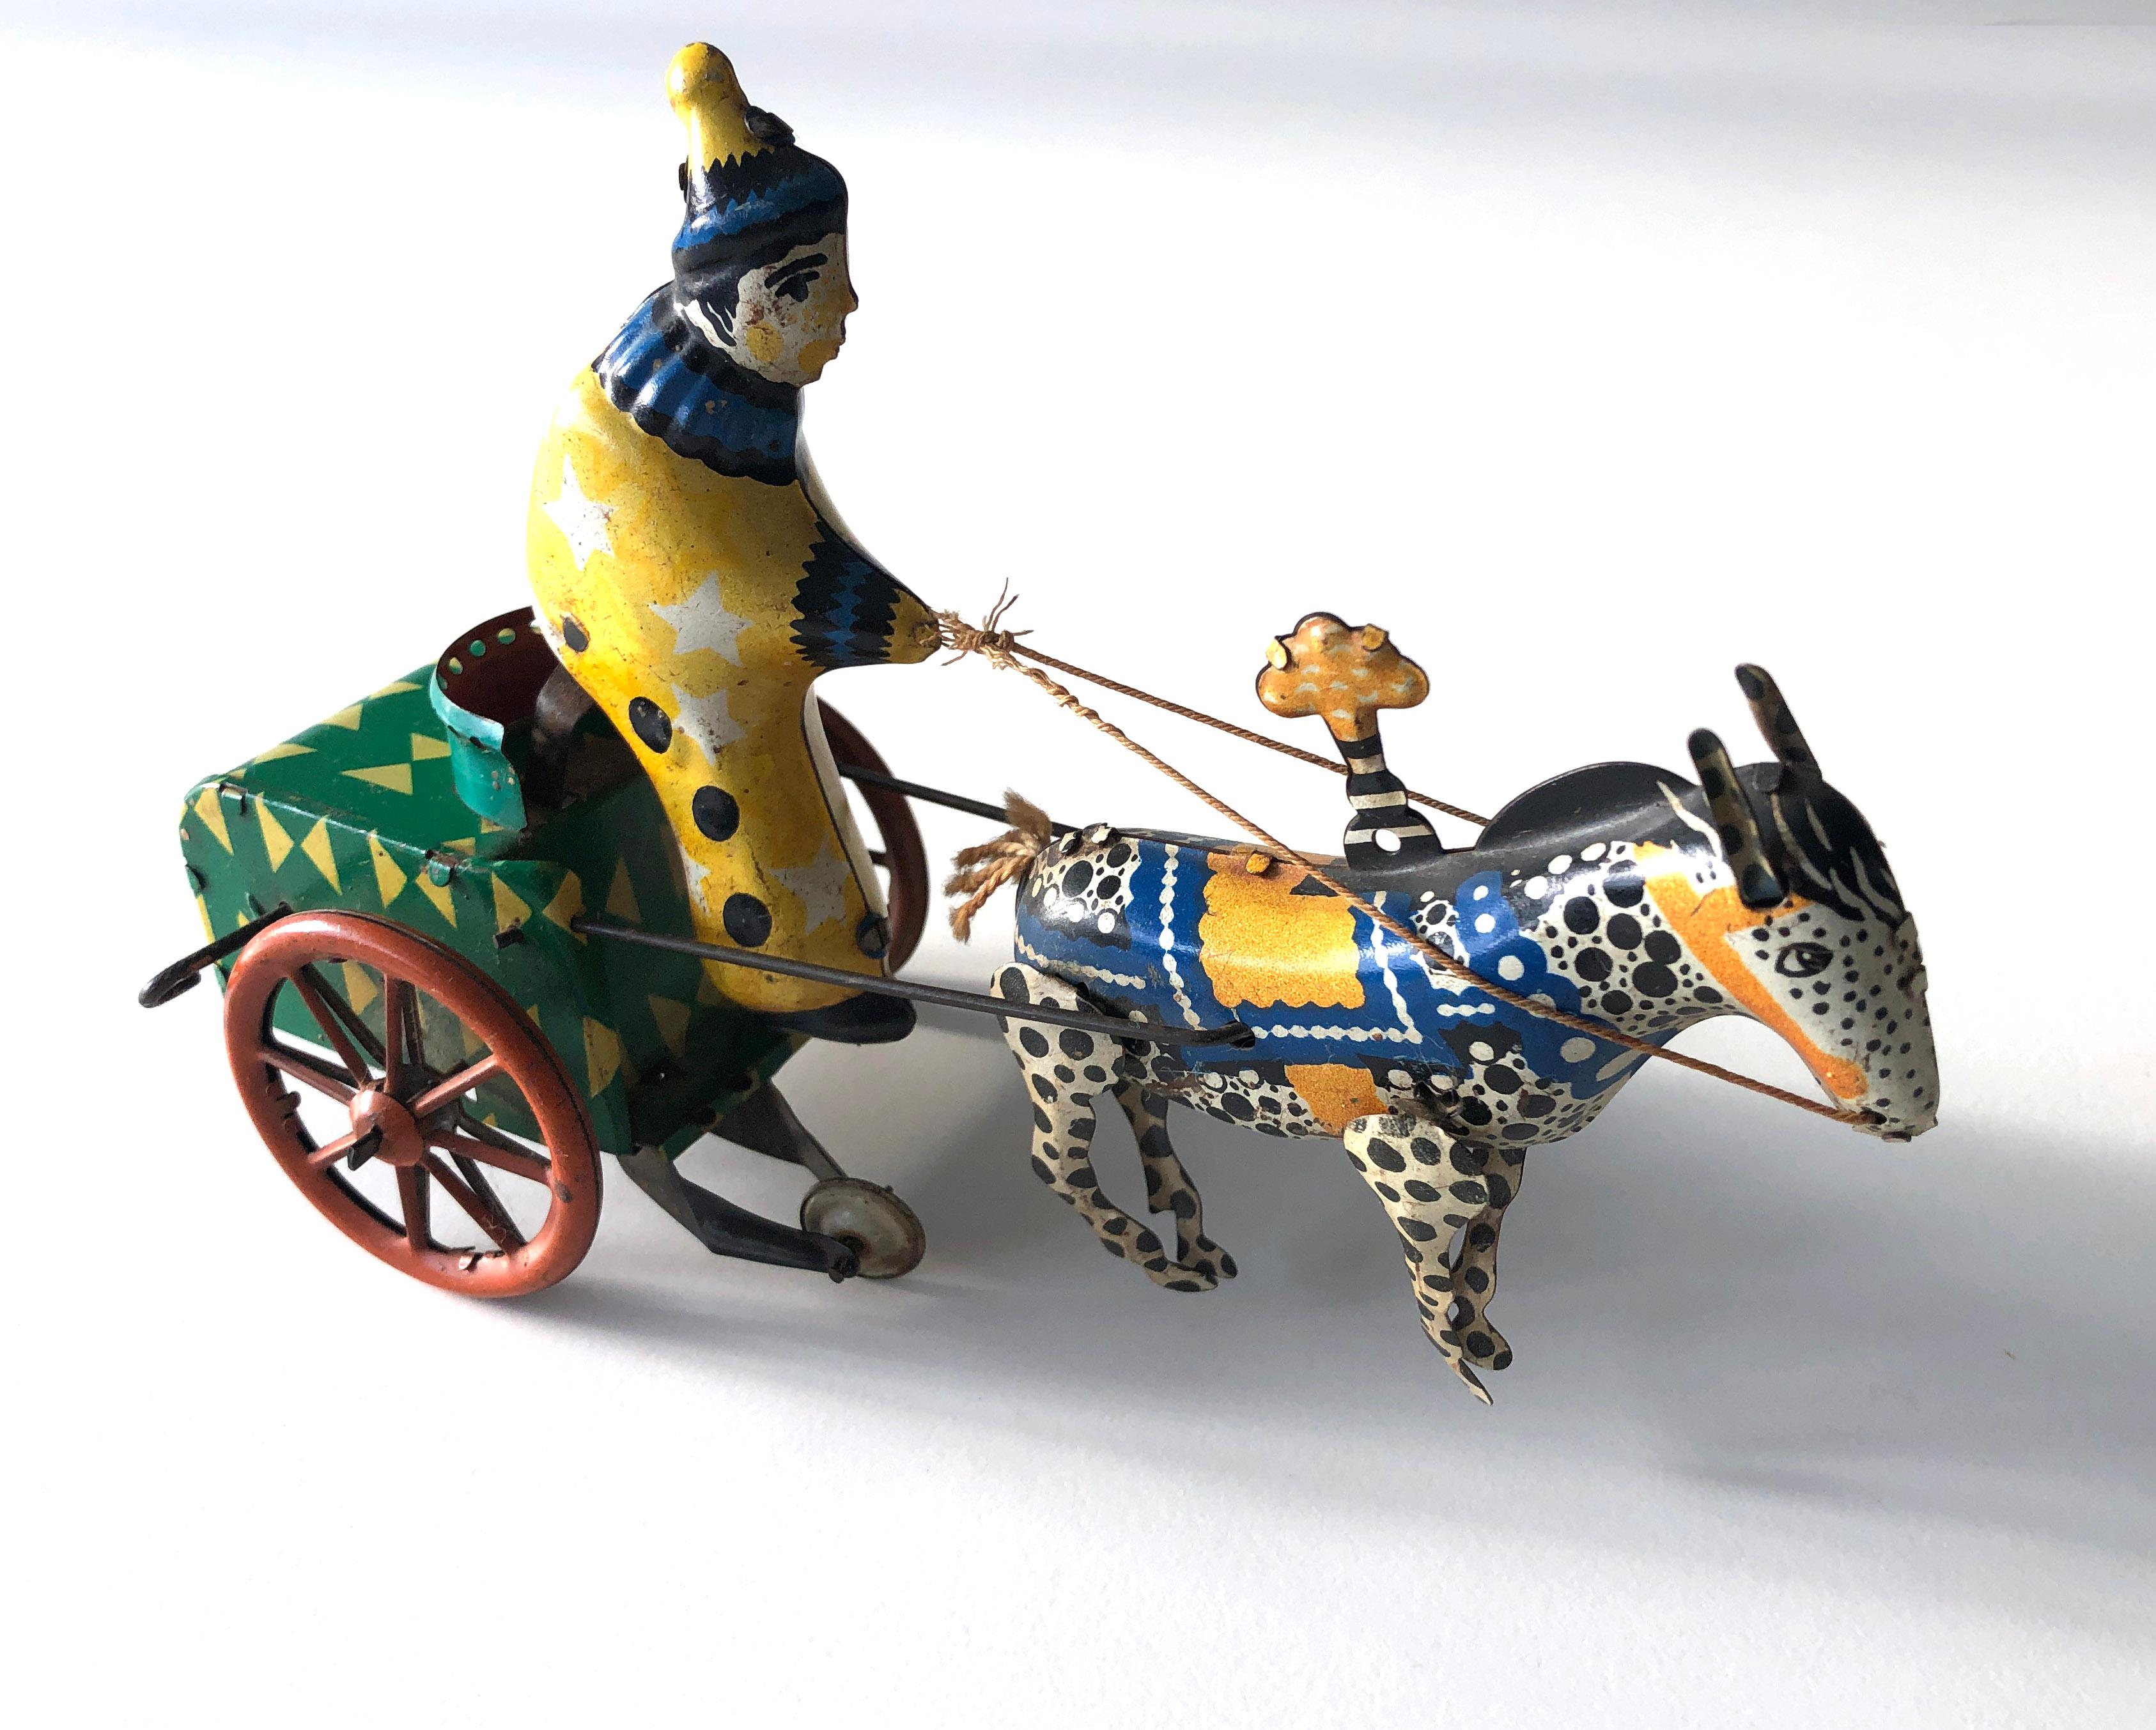 Vintage 1950's USSR Tin Windup Circus Donkey Carriage with clown.
The mechanism is intact but not working. Simple to restore.

Length approx: 18 cm
Width approx: 9.5 cm
Height approx: 13.5 cm

The vehicle is a lovely vintage item for decoration.